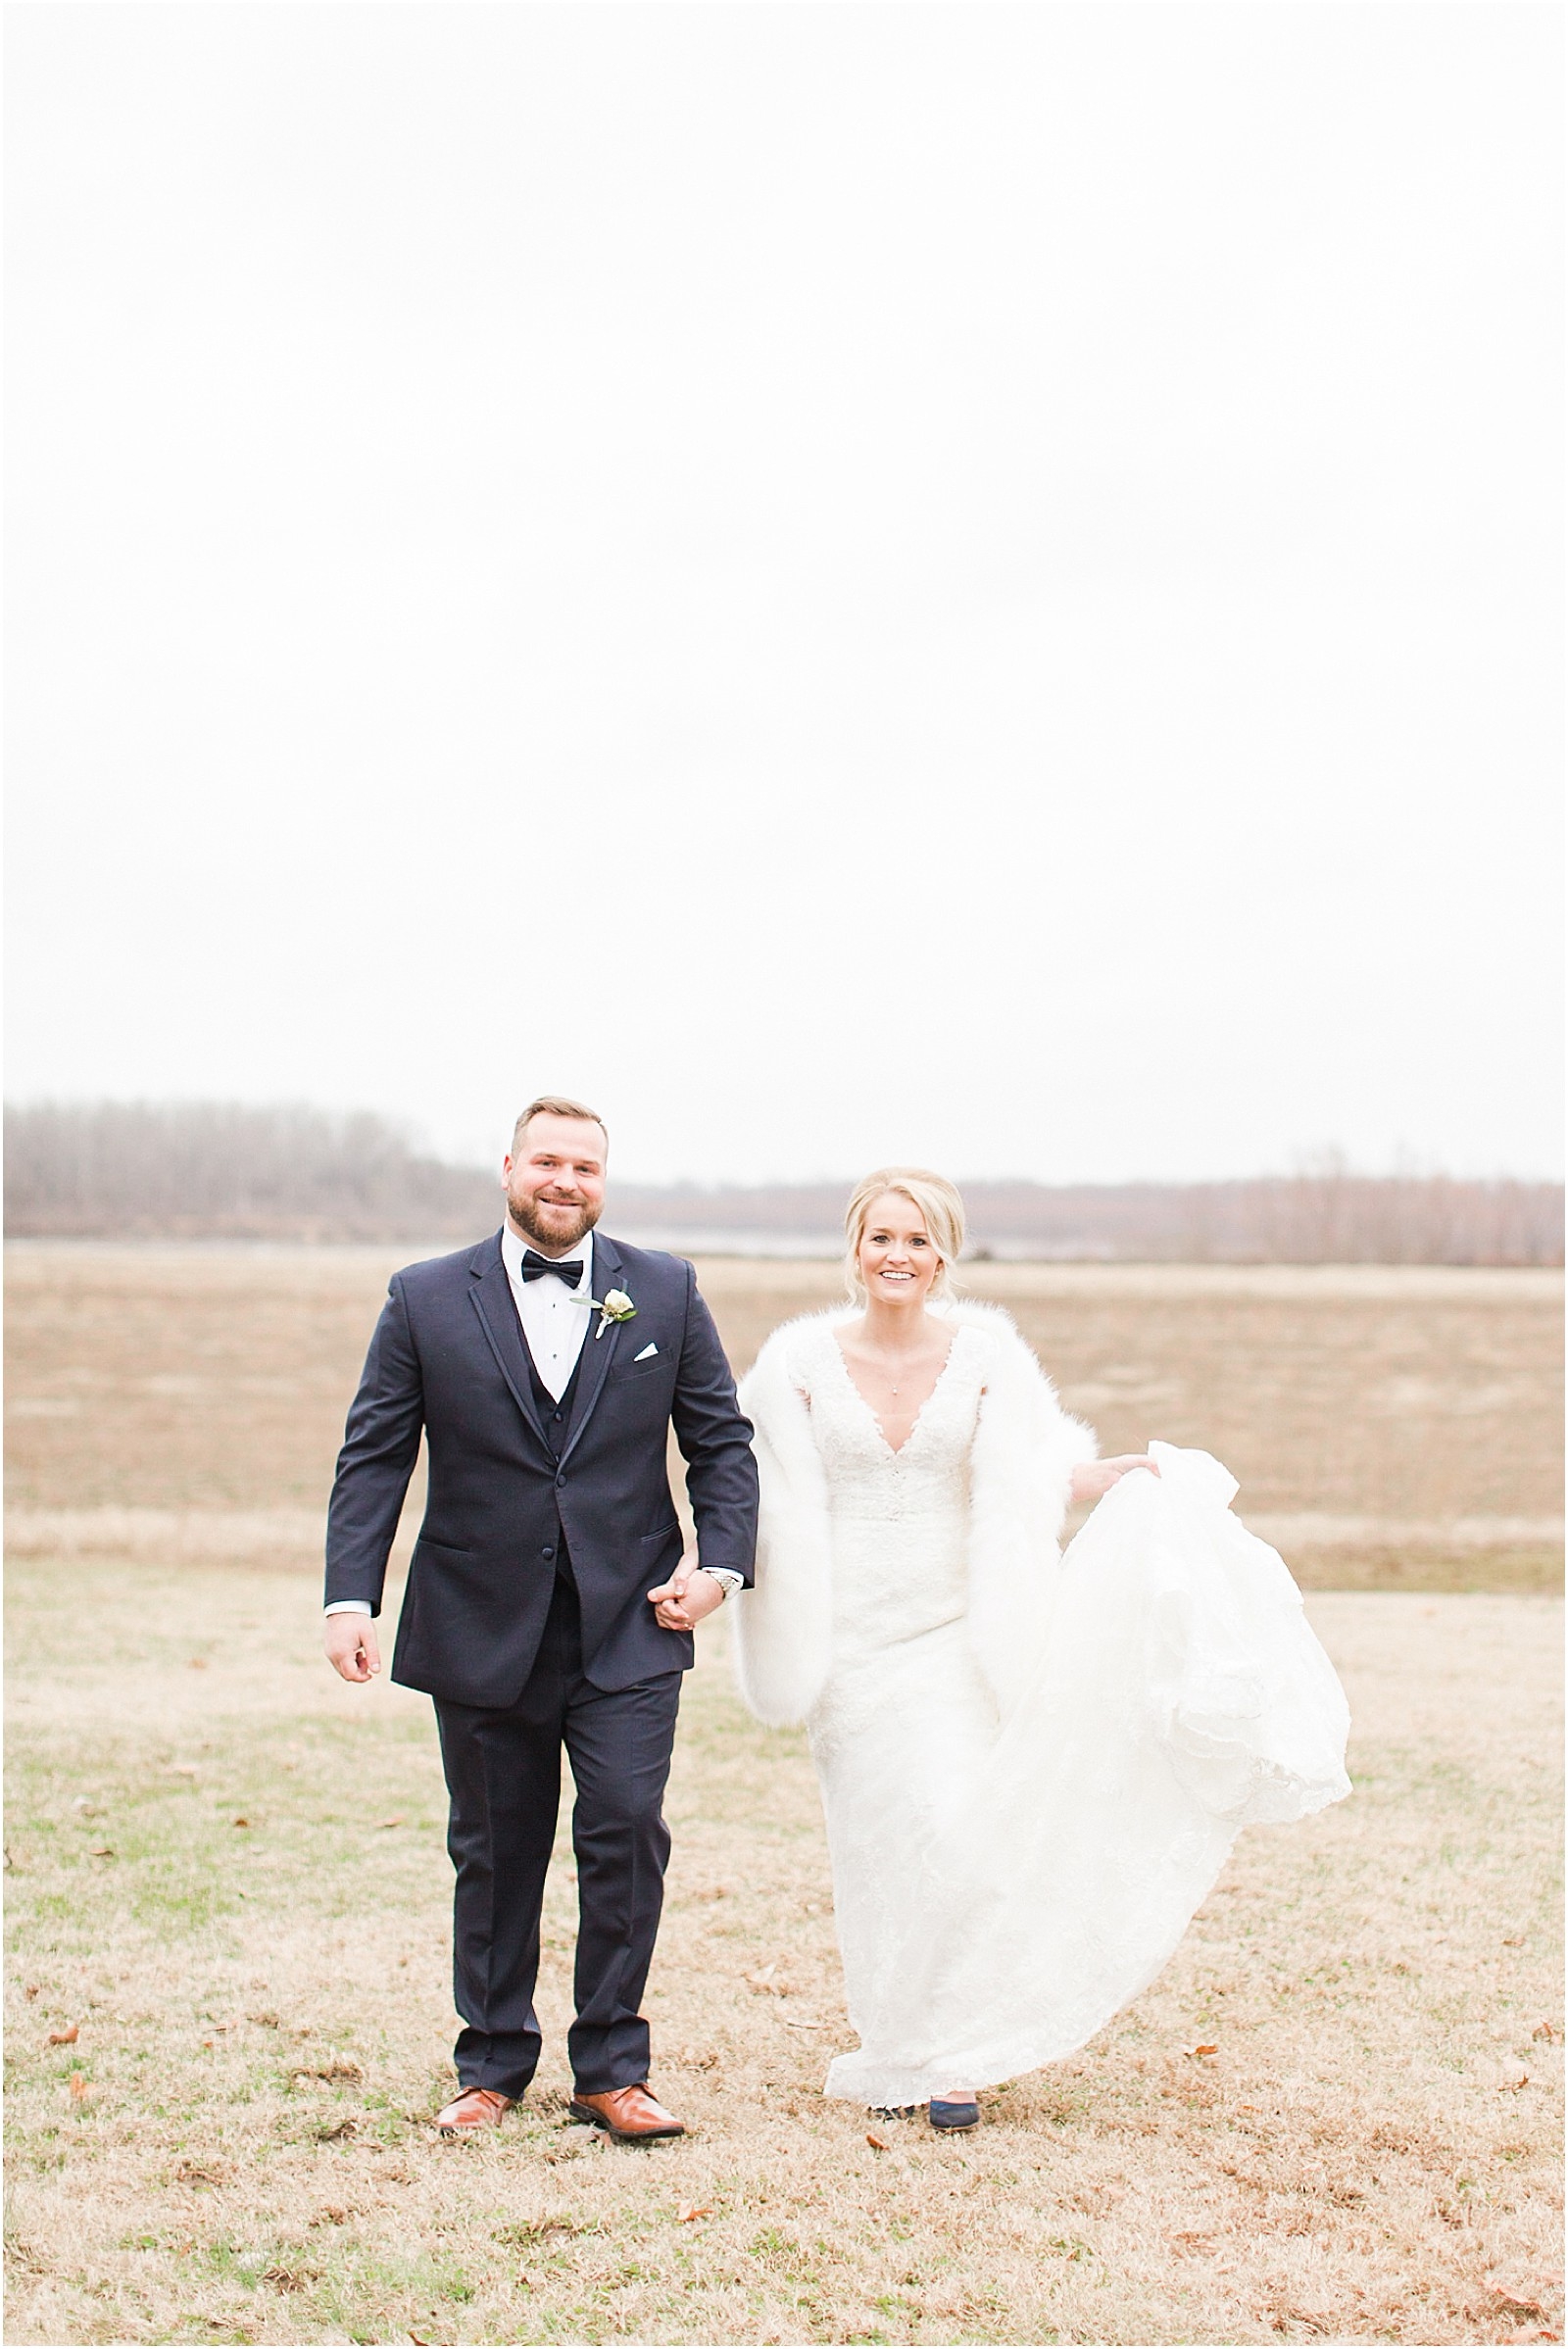 A Classic Winter Wedding in New Harmony | Rachel and Ryan | Bret and Brandie Photography 0103.jpg